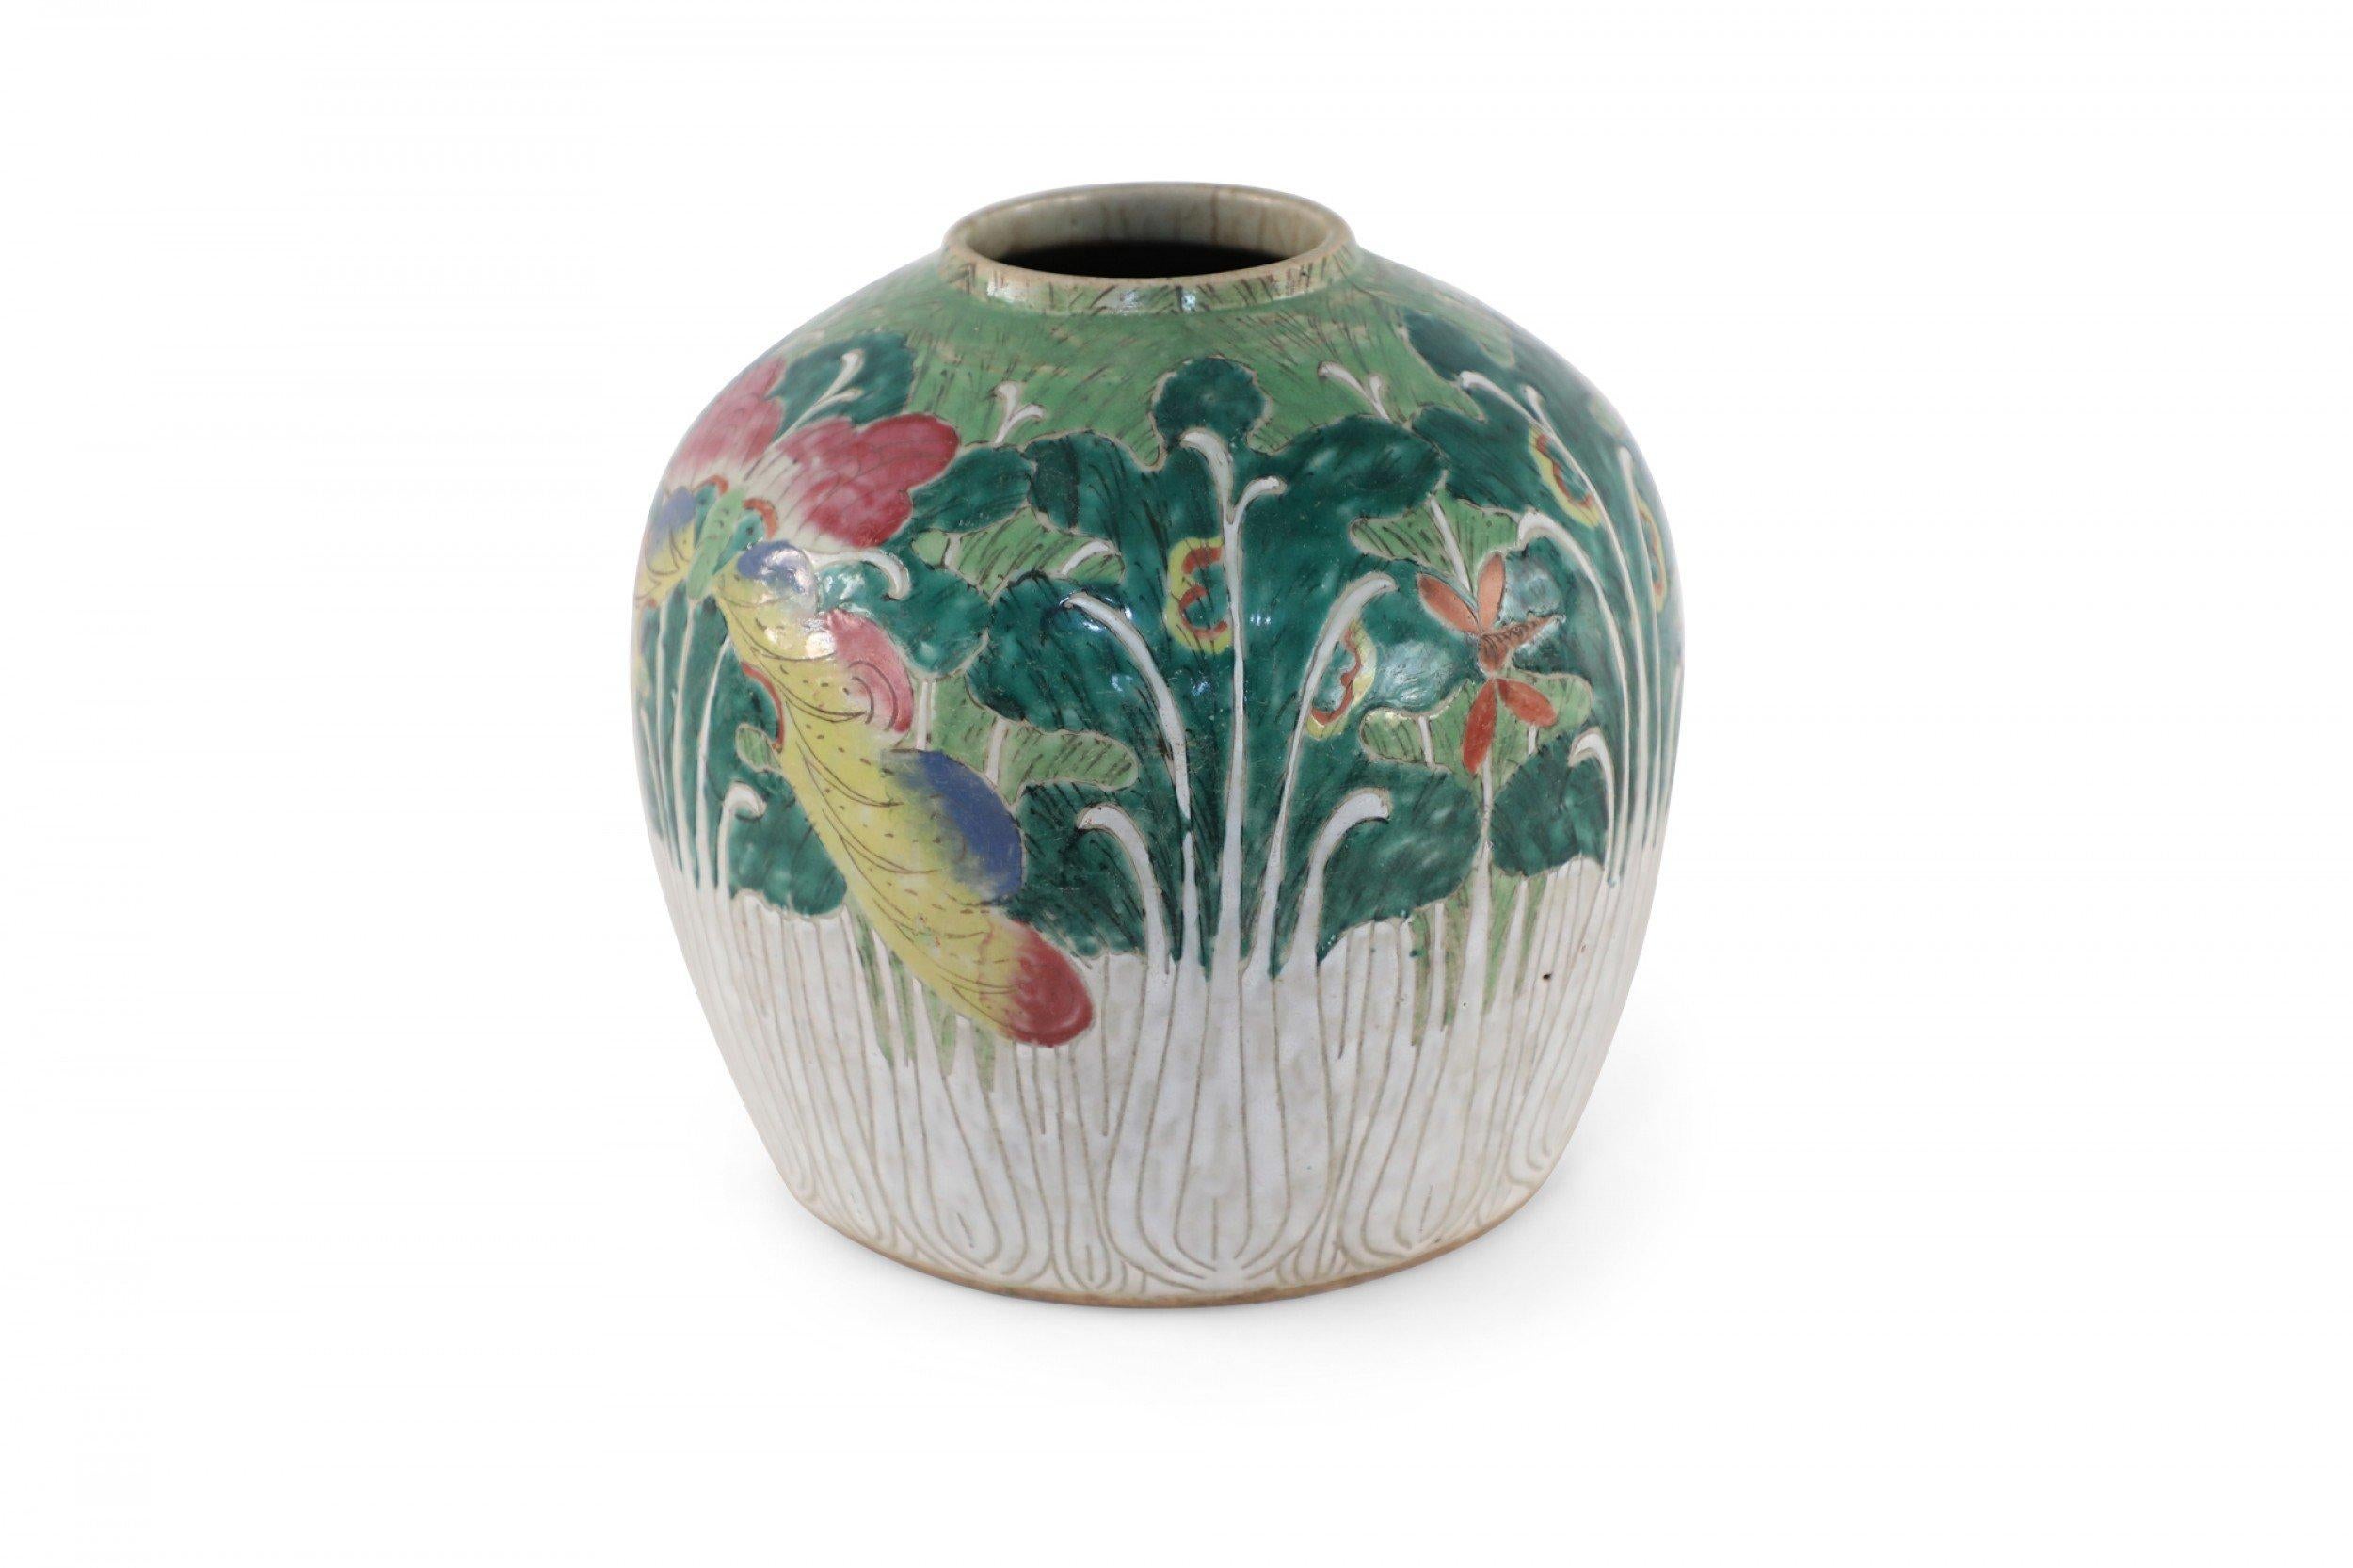 Antique Chinese (early 20th century) round porcelain vase with a small mouth opening and cream, lined design on the bottom half that grows into lush, green vegetation on the top.
      